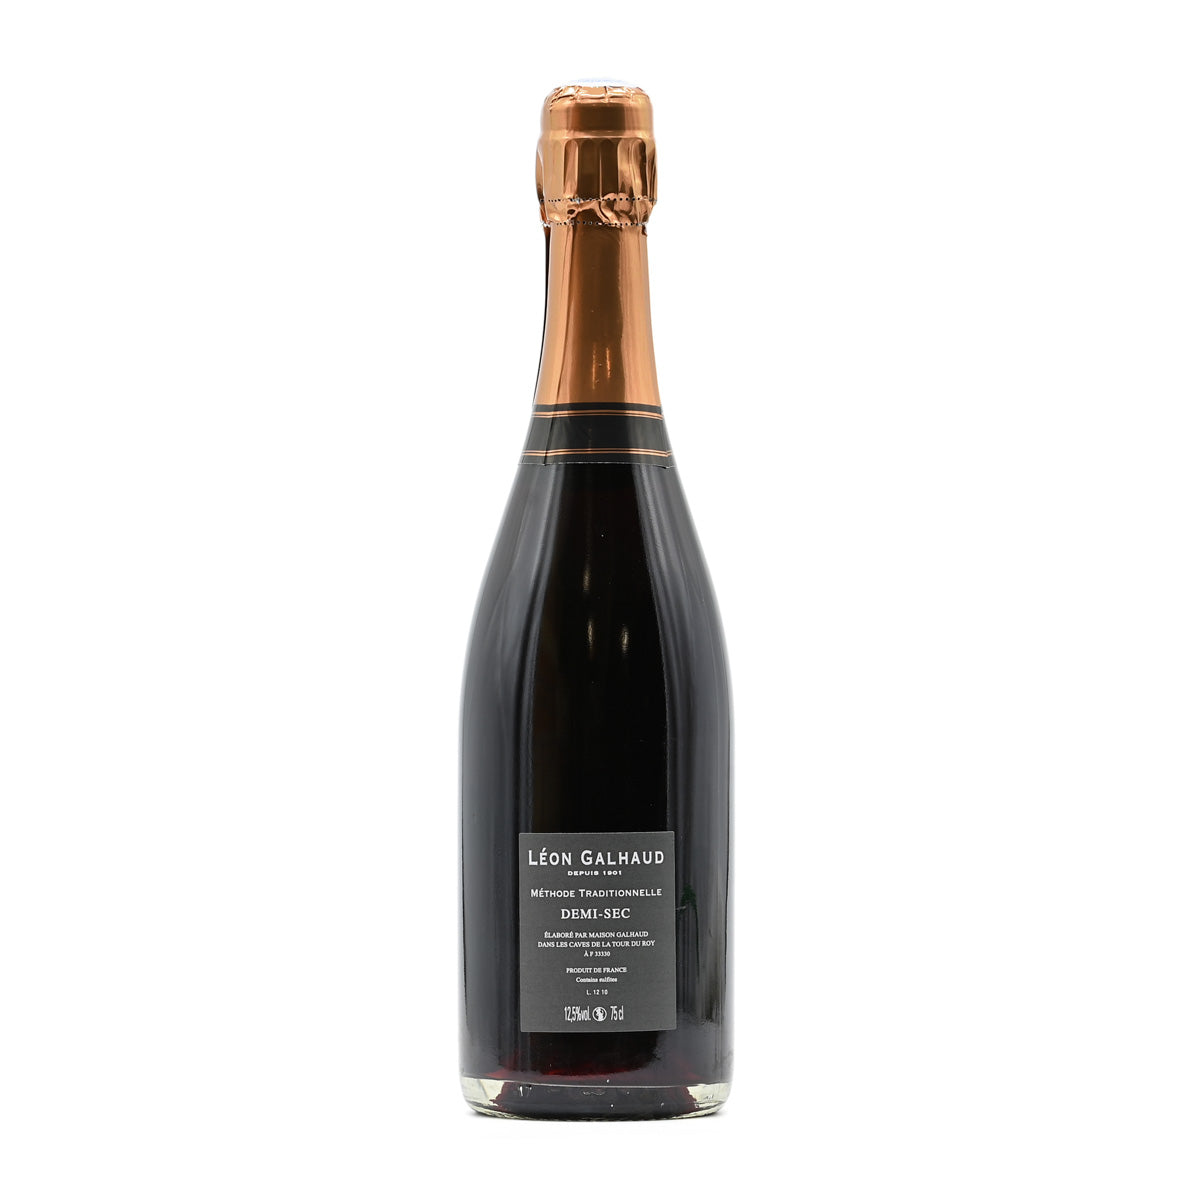 Leon Galhaud Demi-Sec Sparkling Red wine, made with Champagne Method, from Southern France – GDV Fine Wines, Hong Kong